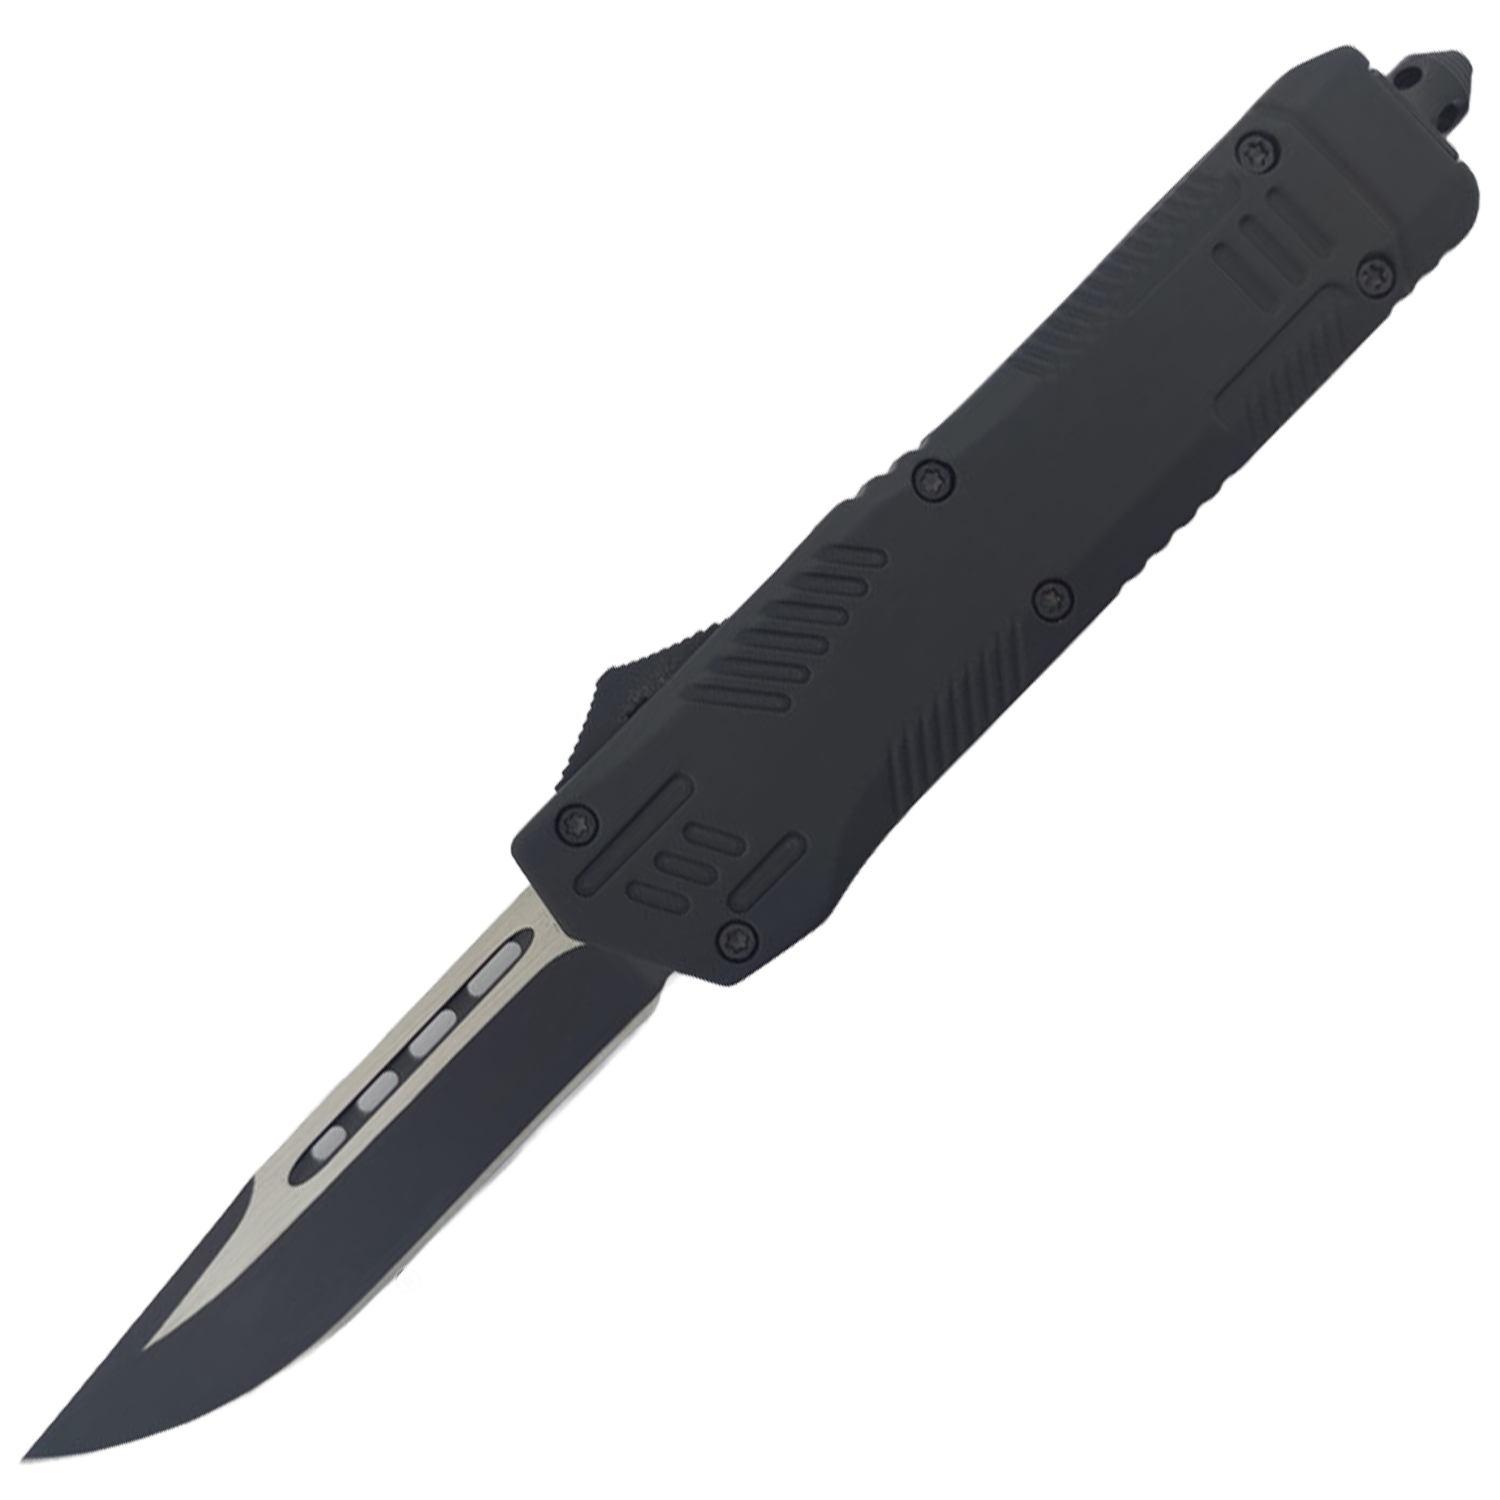 Covert OPS USA OTF Automatic Knife 9 inch Black D2 Steel Blade DP